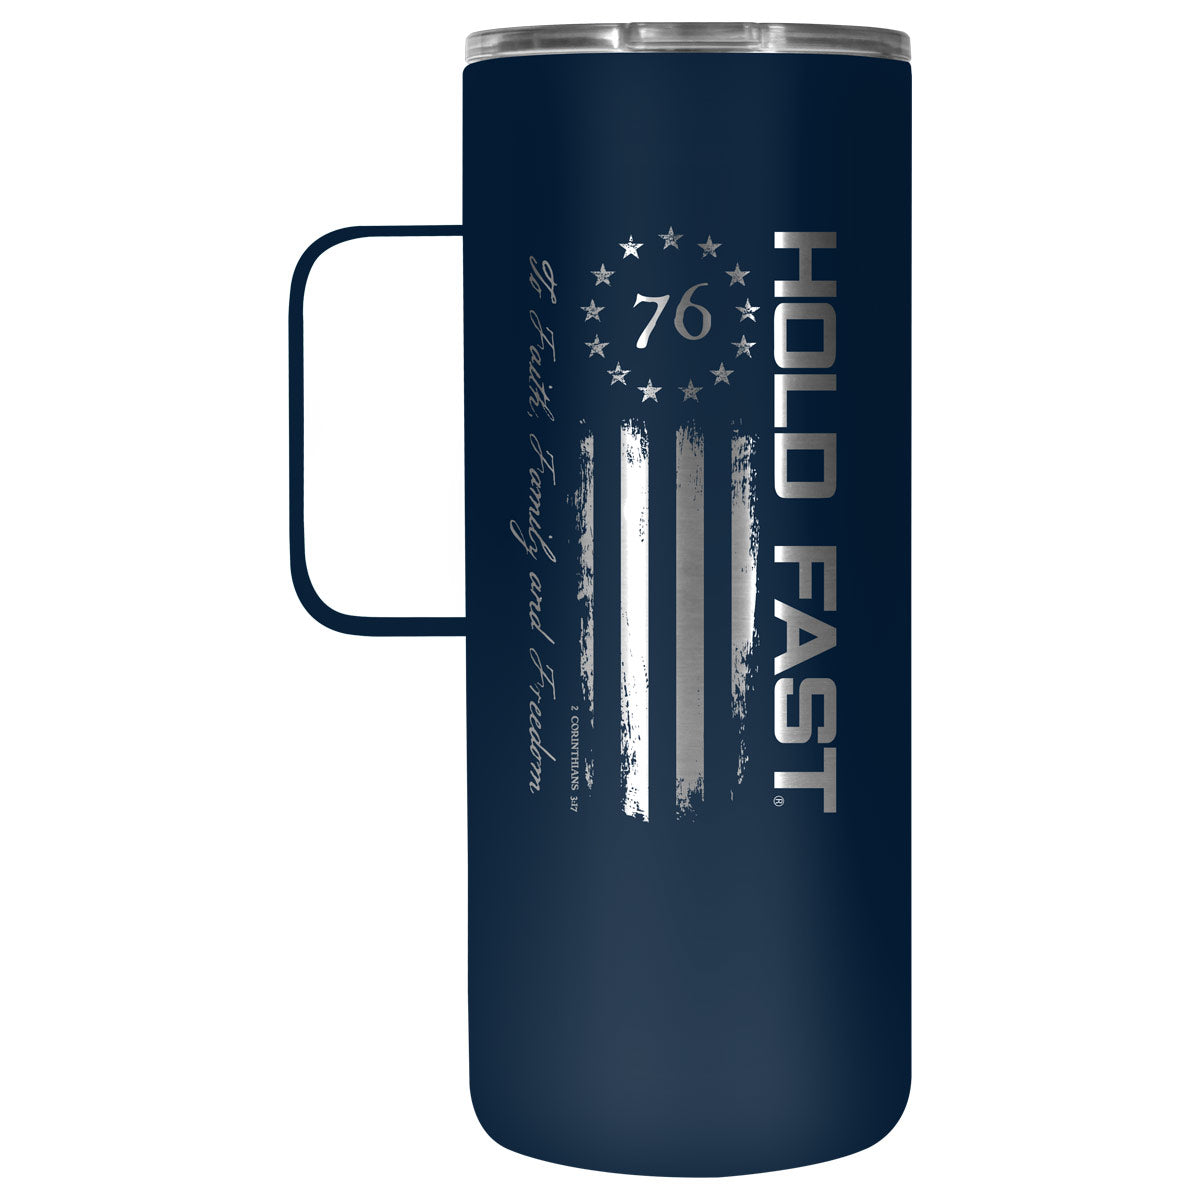 HOLD FAST 22 oz Stainless Steel Mug With Handle 76